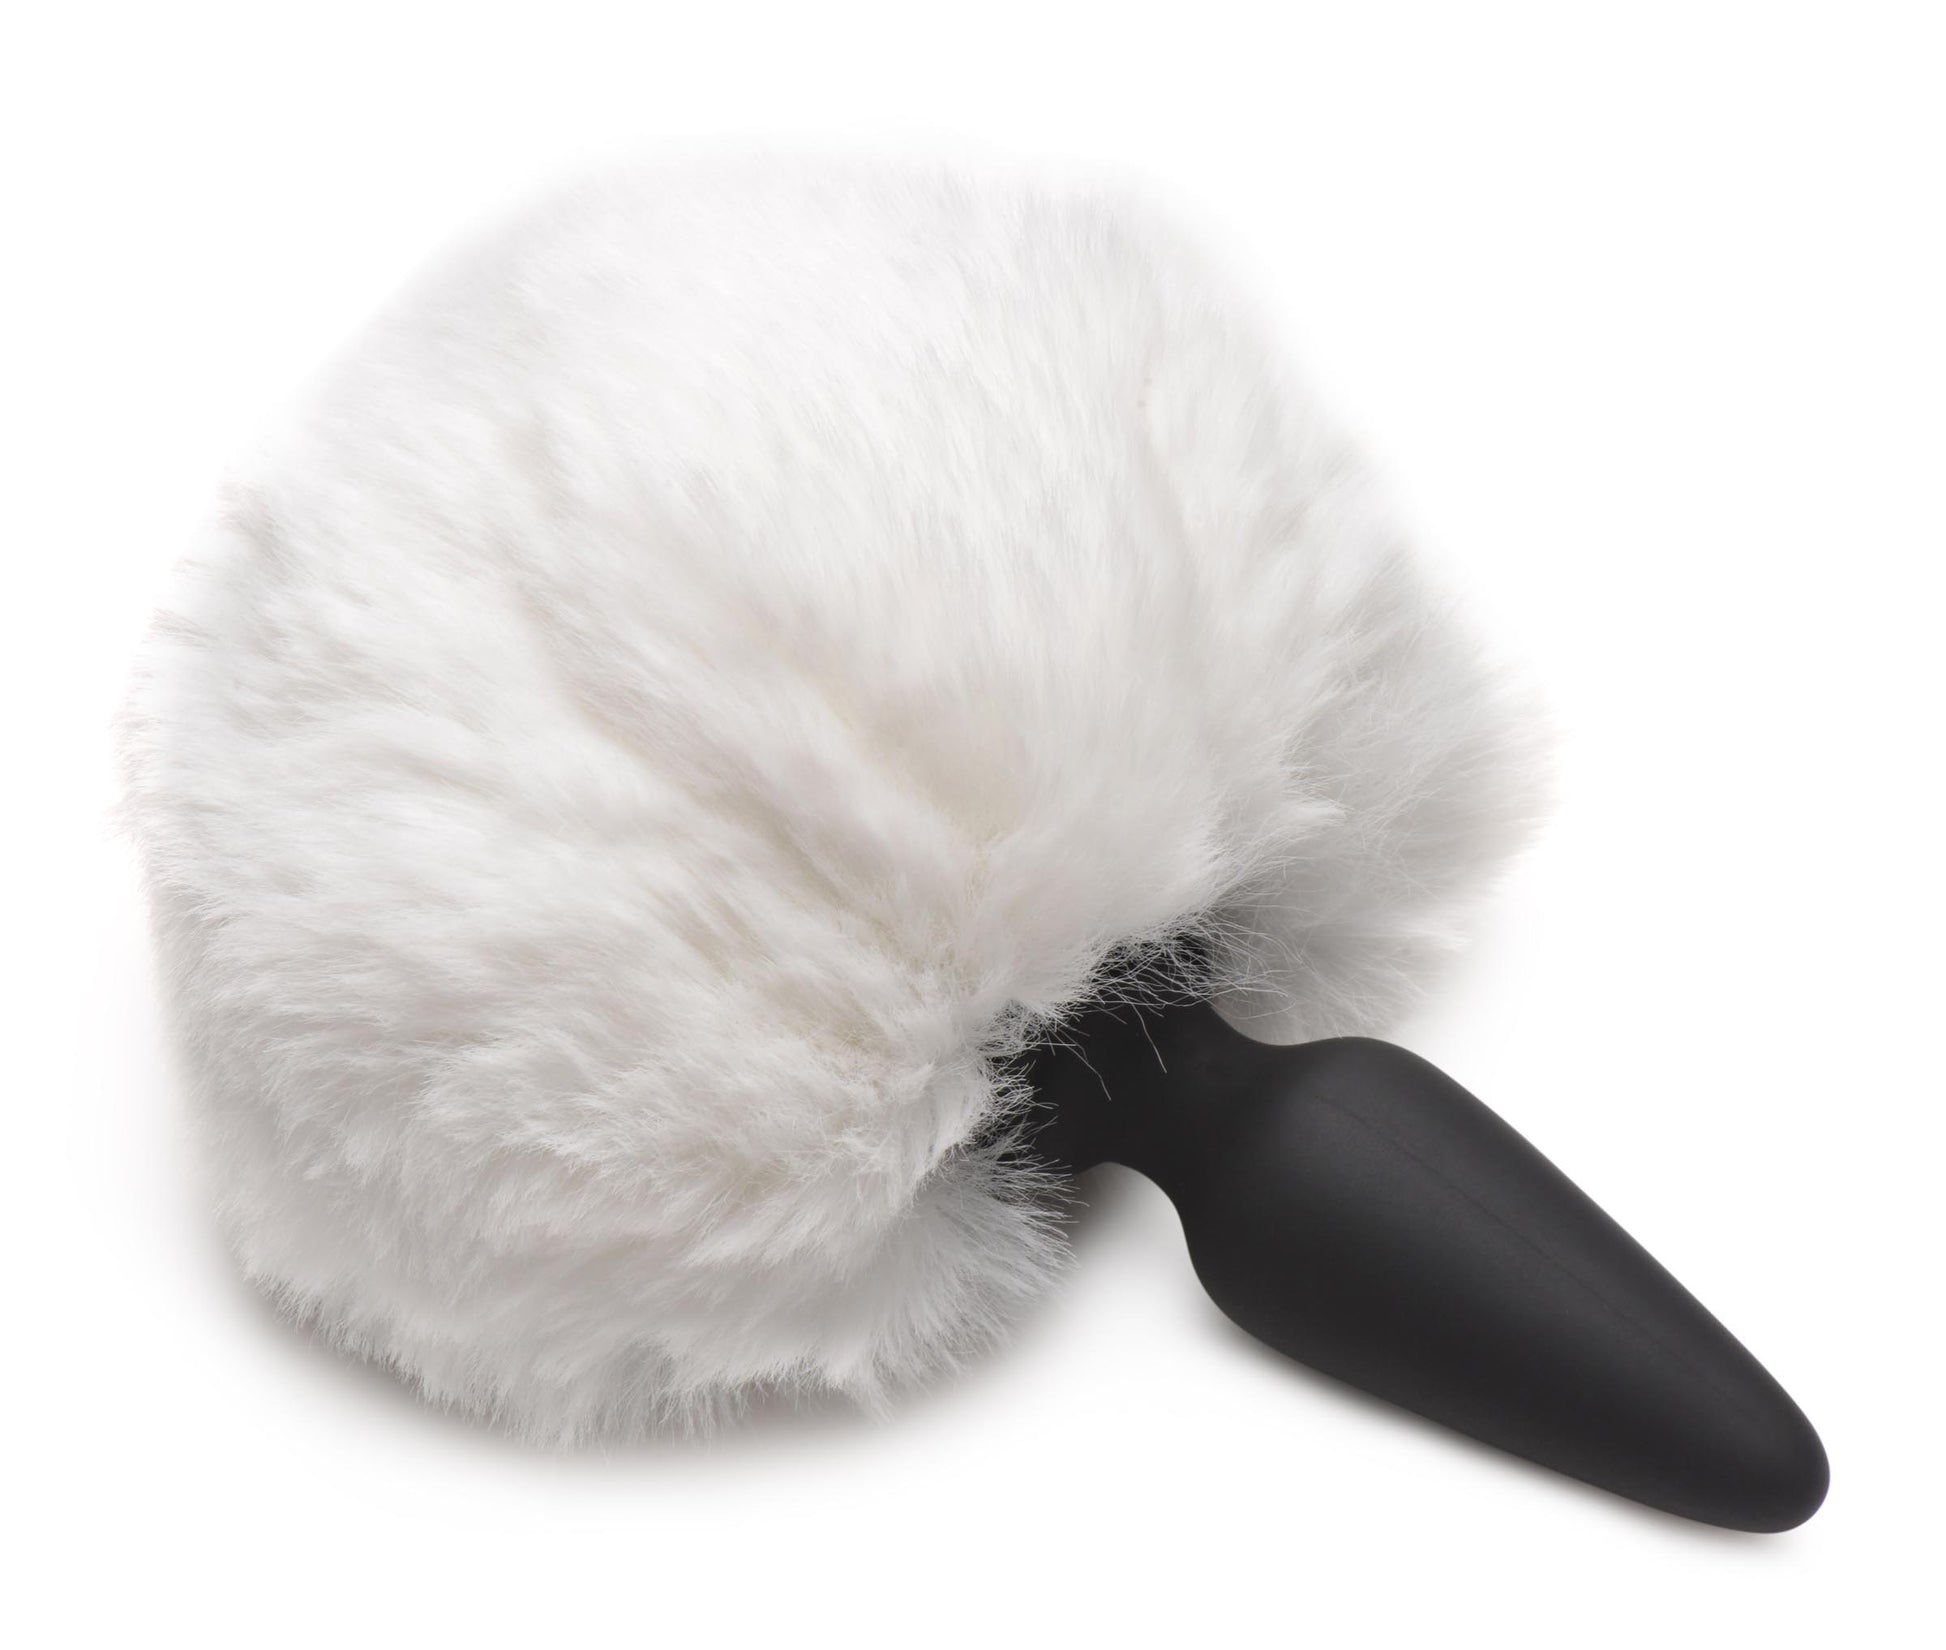 Large Anal Plug with Interchangeable Bunny Tail - White - UABDSM